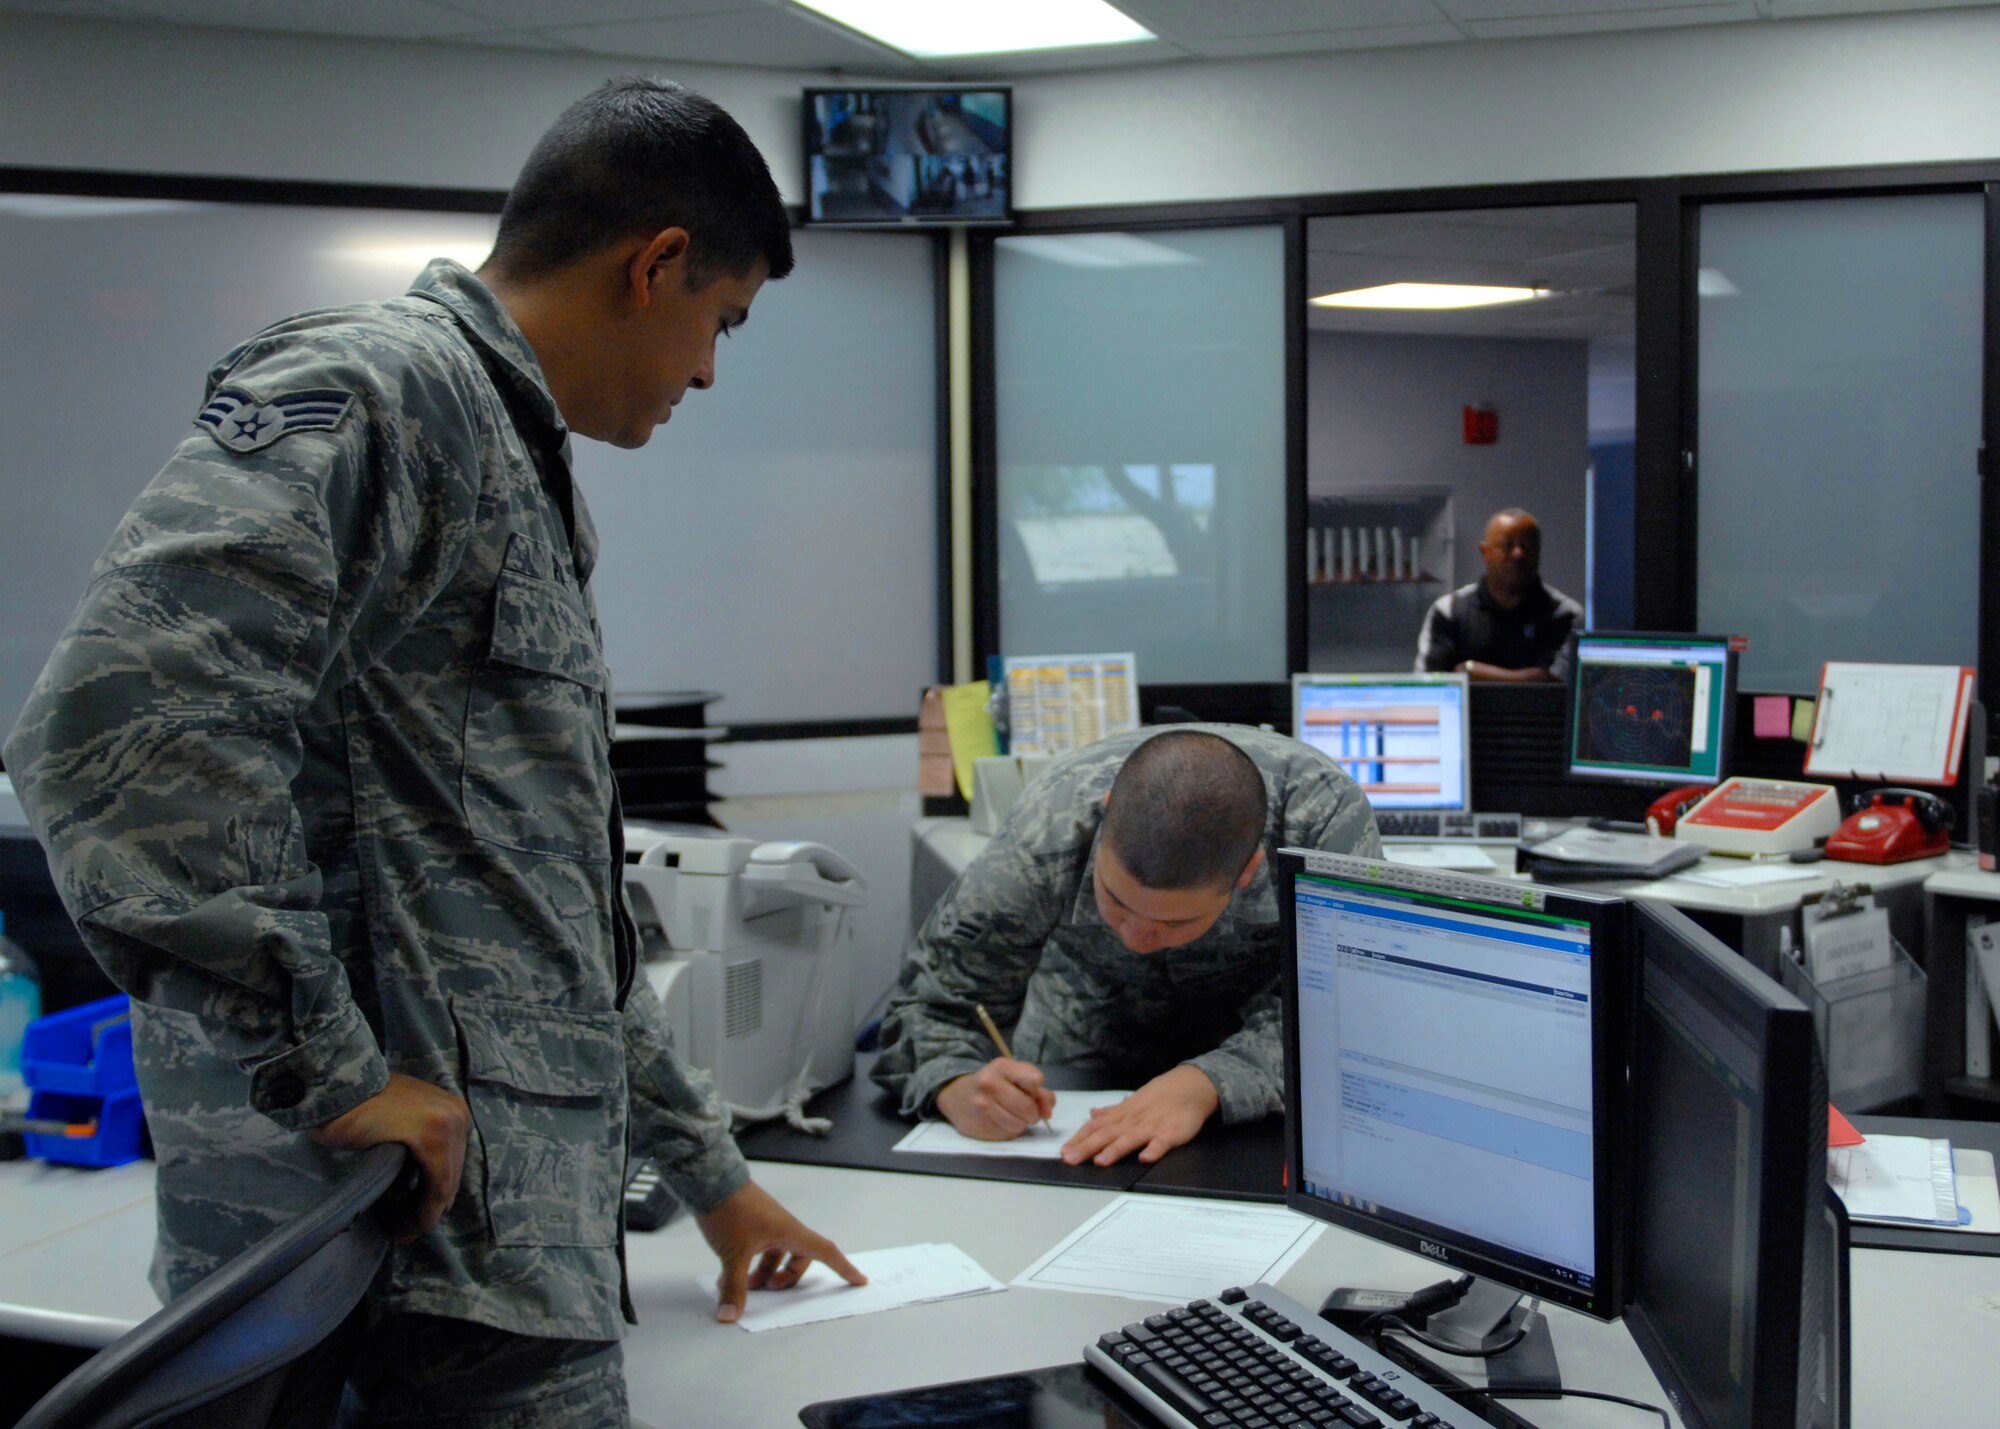 U.S. Air Force Senior Airman Ralph Ruiz and Airman 1st Class Chris Greg, both from the 355th Operations Support Squadron base operations, complete paperwork after coordinating with other agencies, such as 355th Fighter Wing Command Post, on runway activities at Davis-Monthan Air Force Base, Ariz., June 4, 2013. One of the primary duties of Airmen assigned to base ops is to track inbound and outbound aircraft. (U.S. Air Force photo by Airman 1st Class Saphfire Cook/Released)